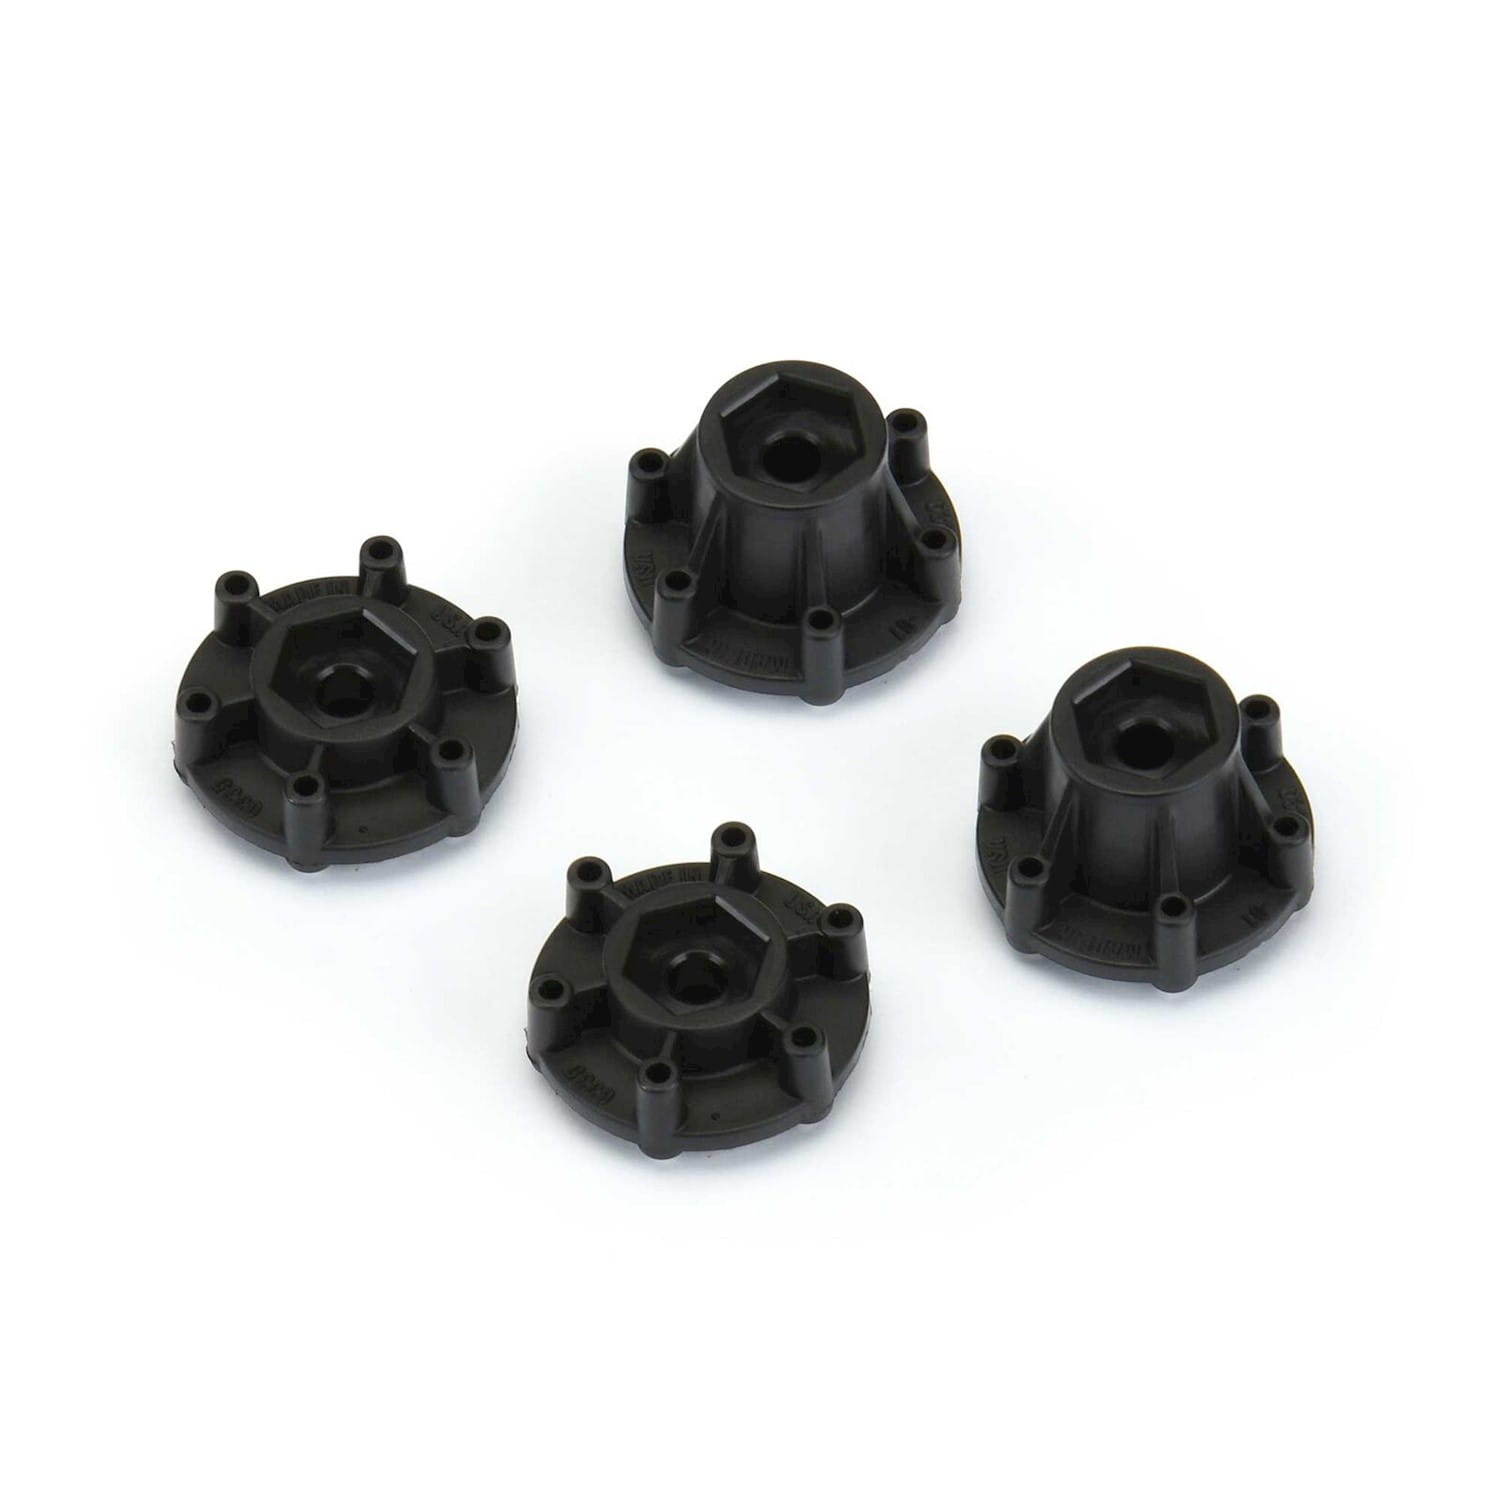 Proline 6x30 to 12mm Hex Adapters (Nrw&Wde) for 6x30 Whls